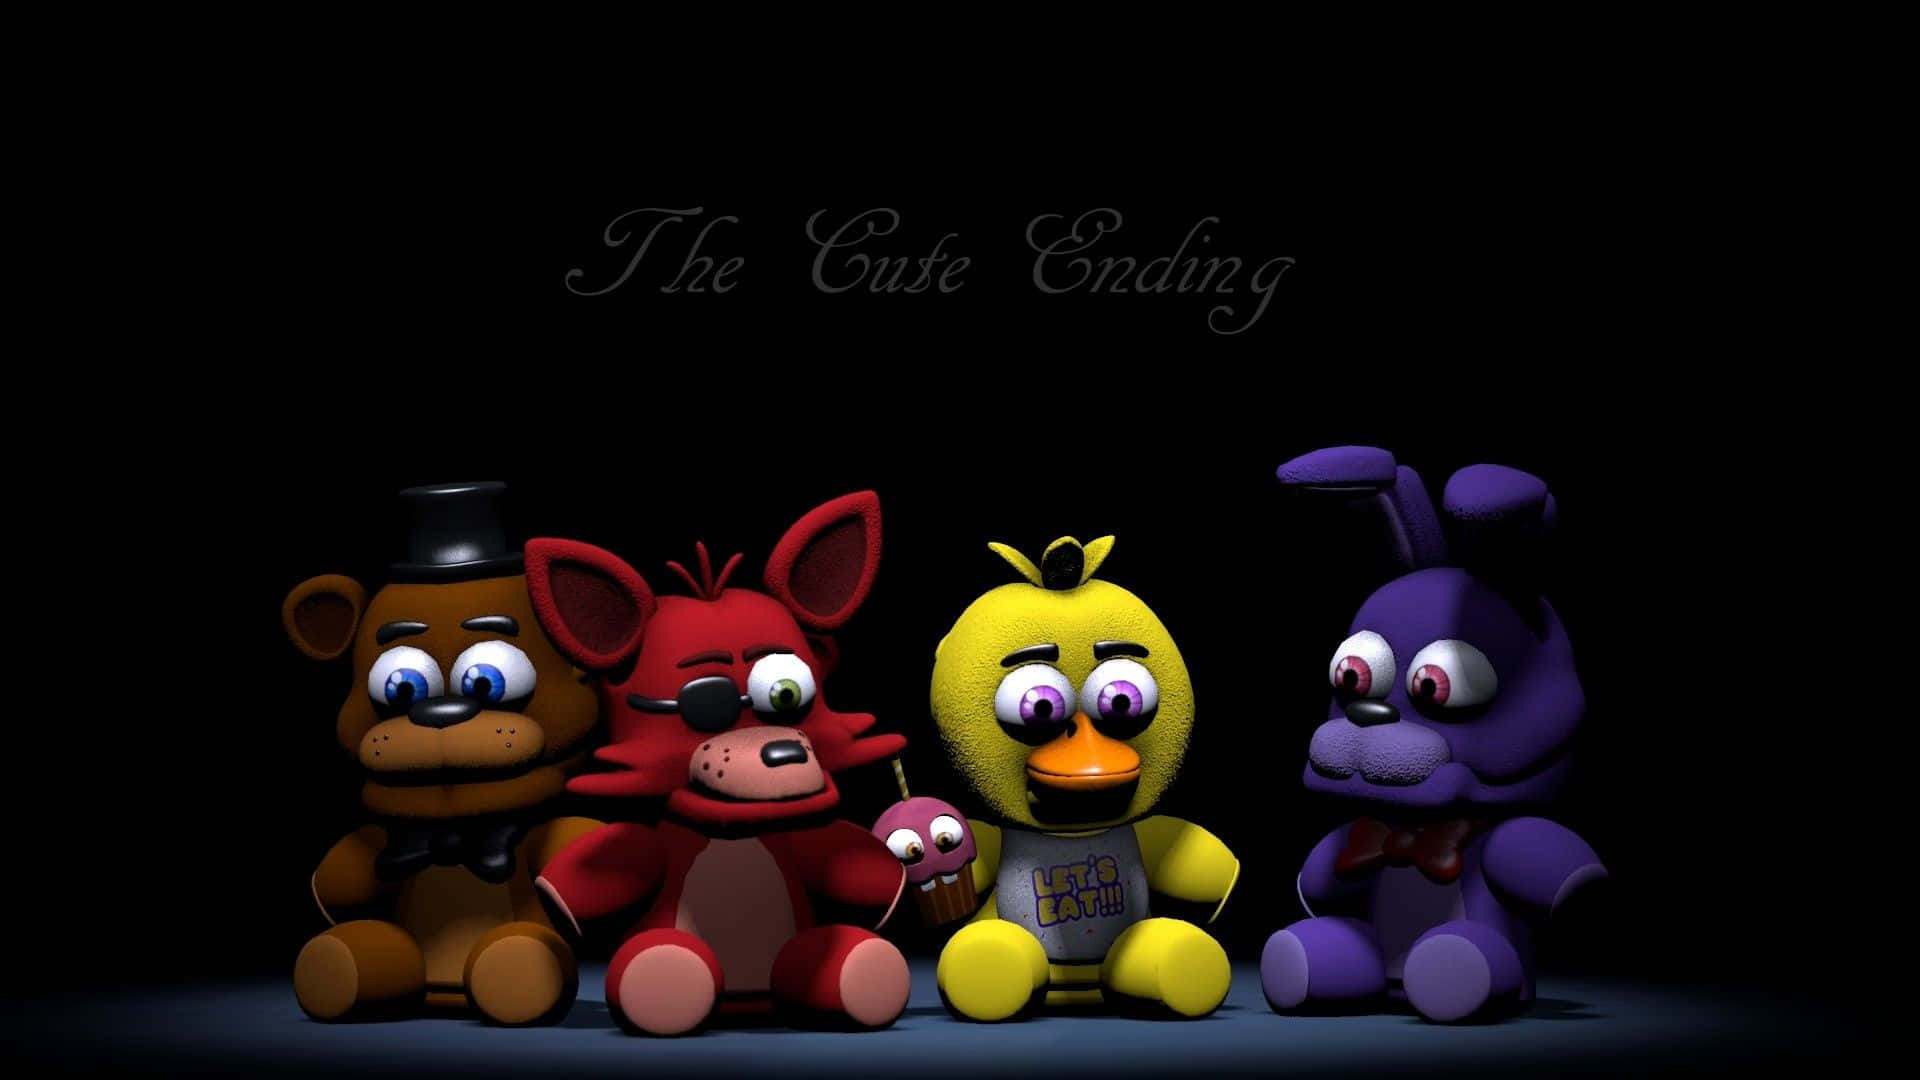 Prepare for a thrilling Five Nights At Freddys Experience Wallpaper